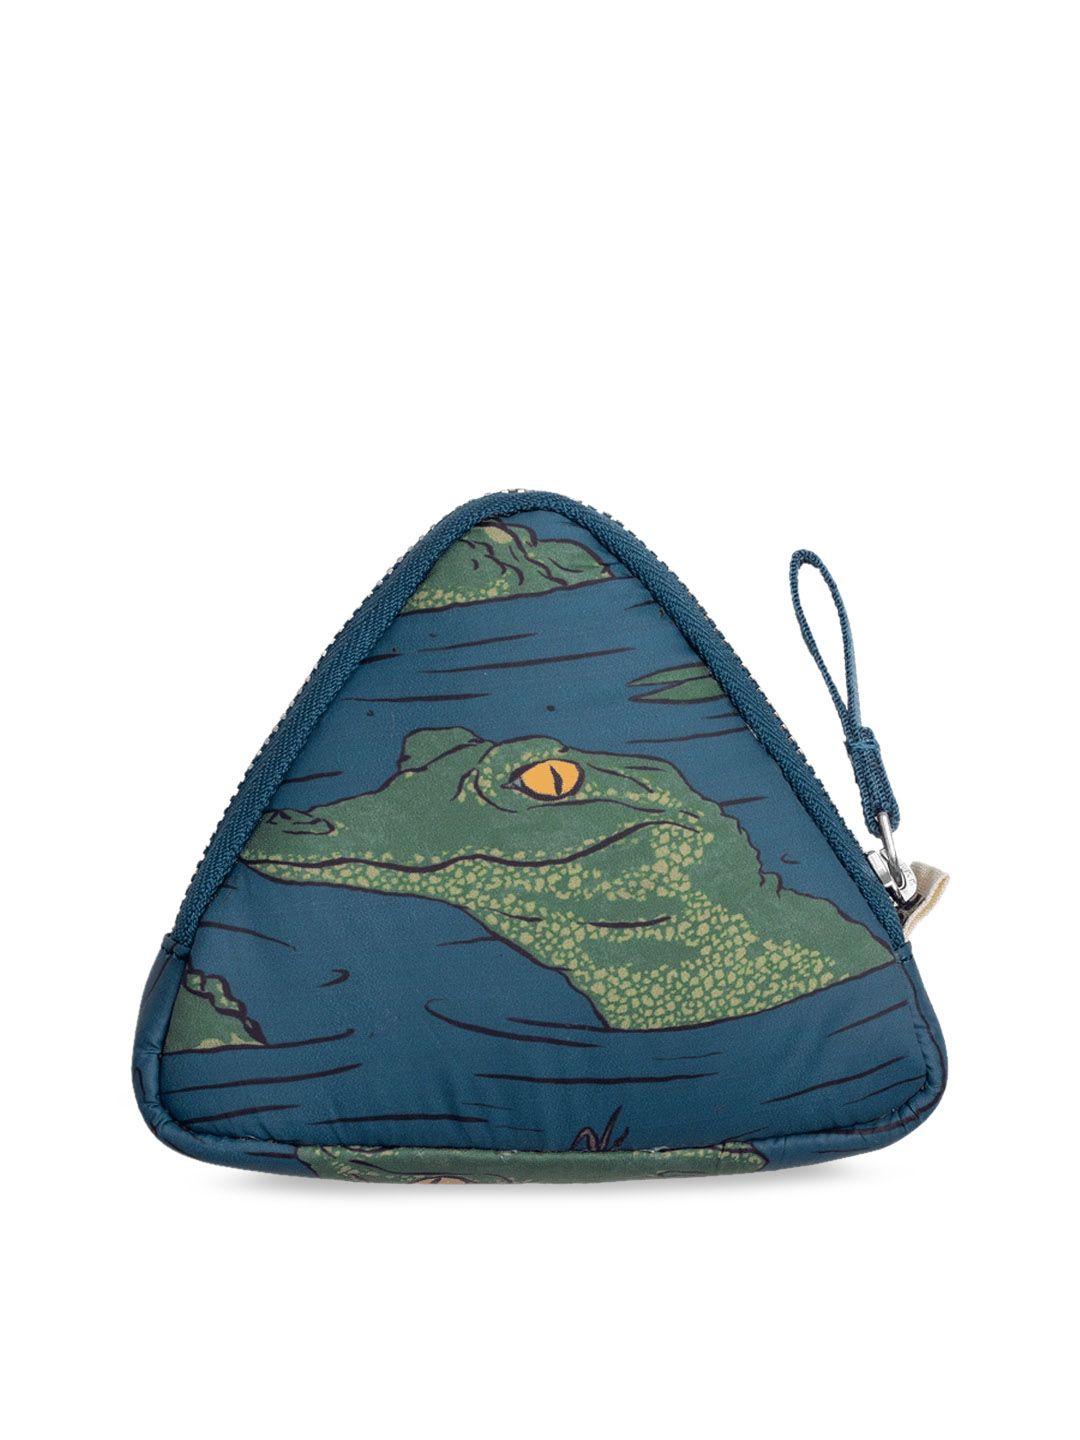 dailyobjects alligator printed water-repellent triangle pouch